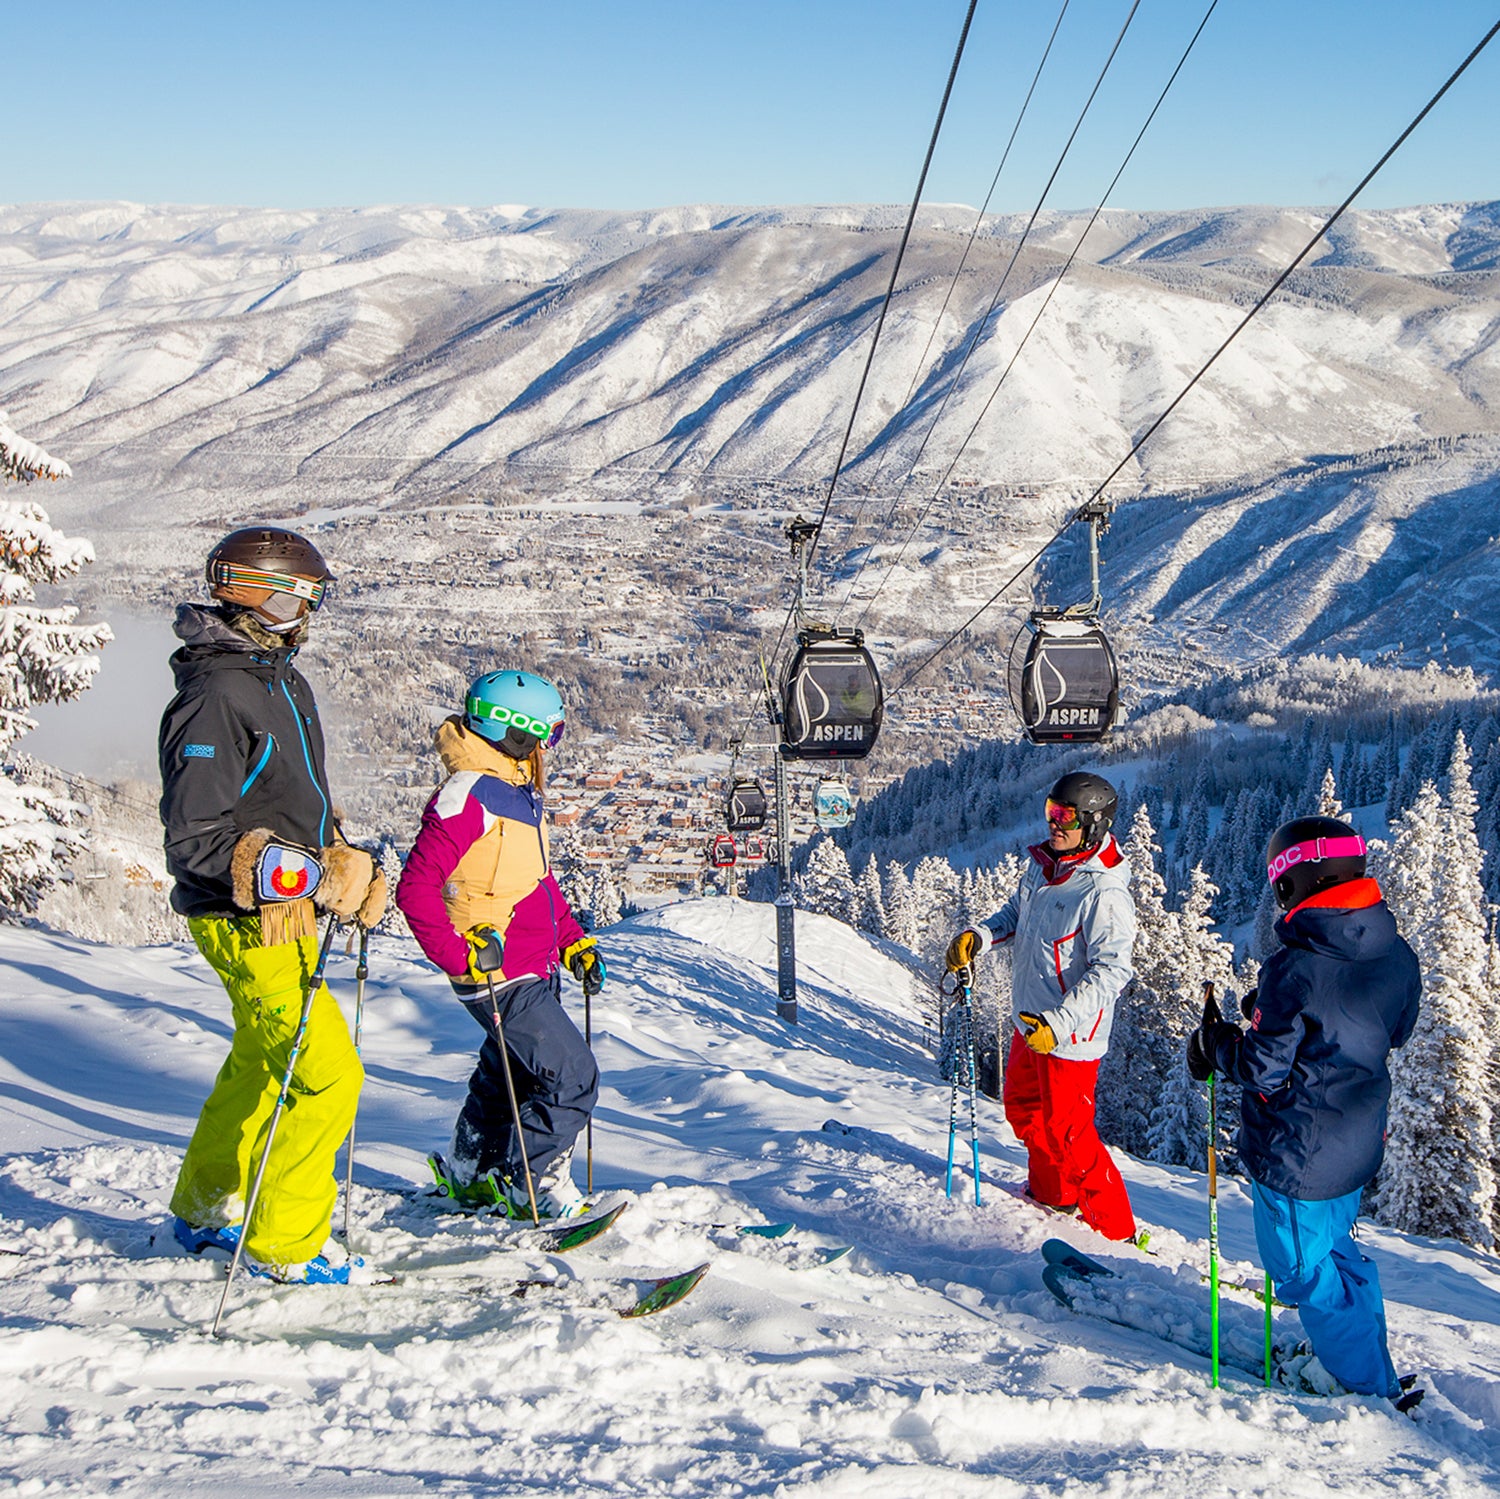 Aspen, Colorado Travel Guide: The Best Things to Do and Places to Ski